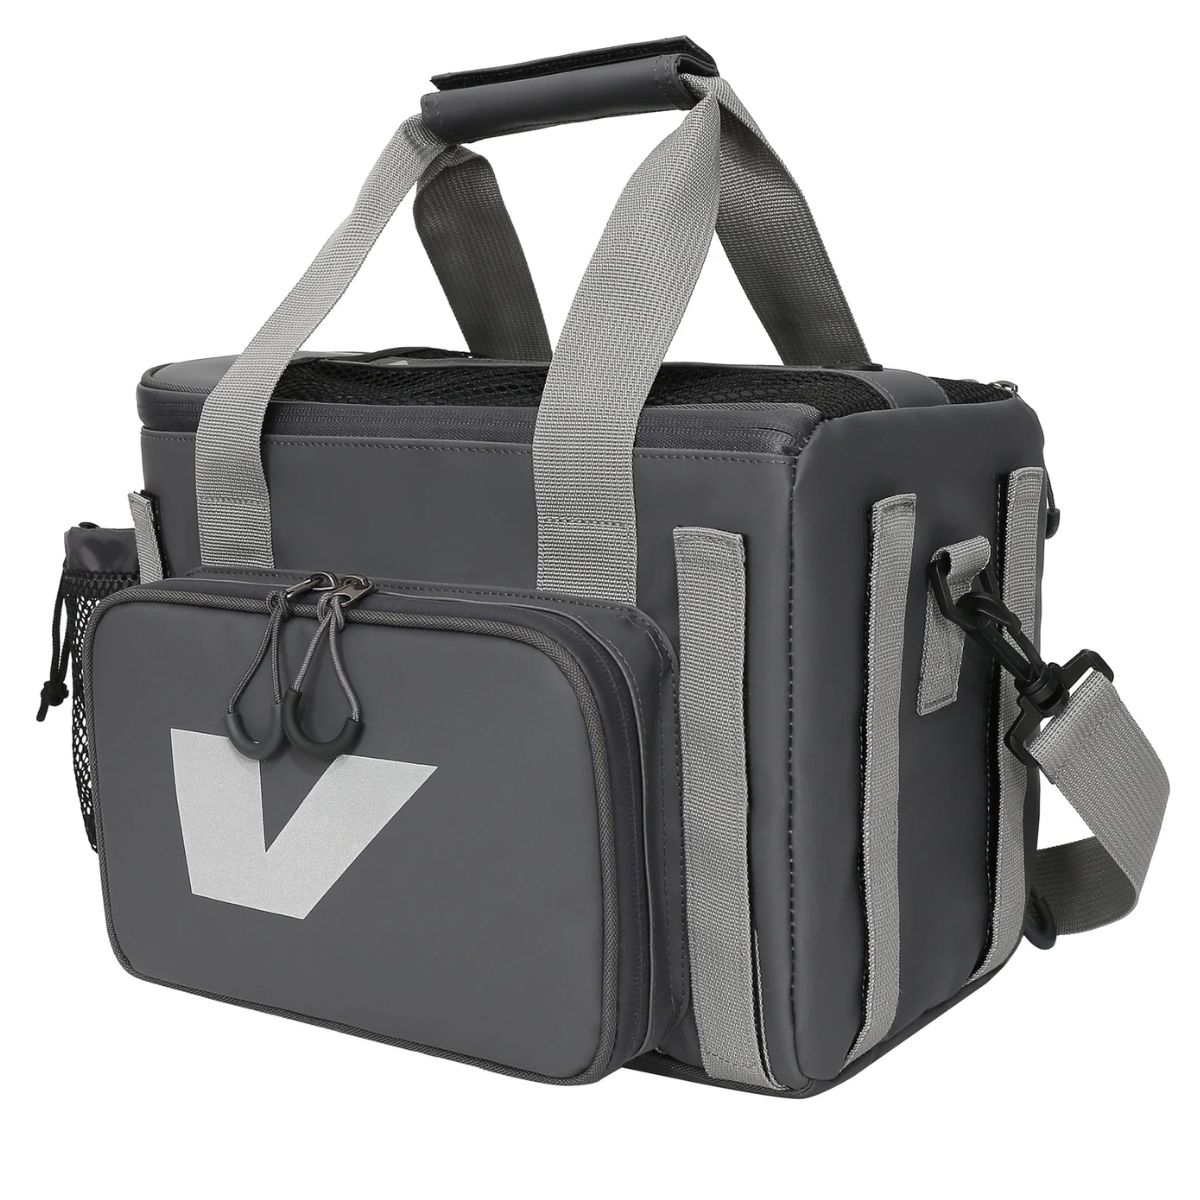 The Trunk Bag With Side Pockets